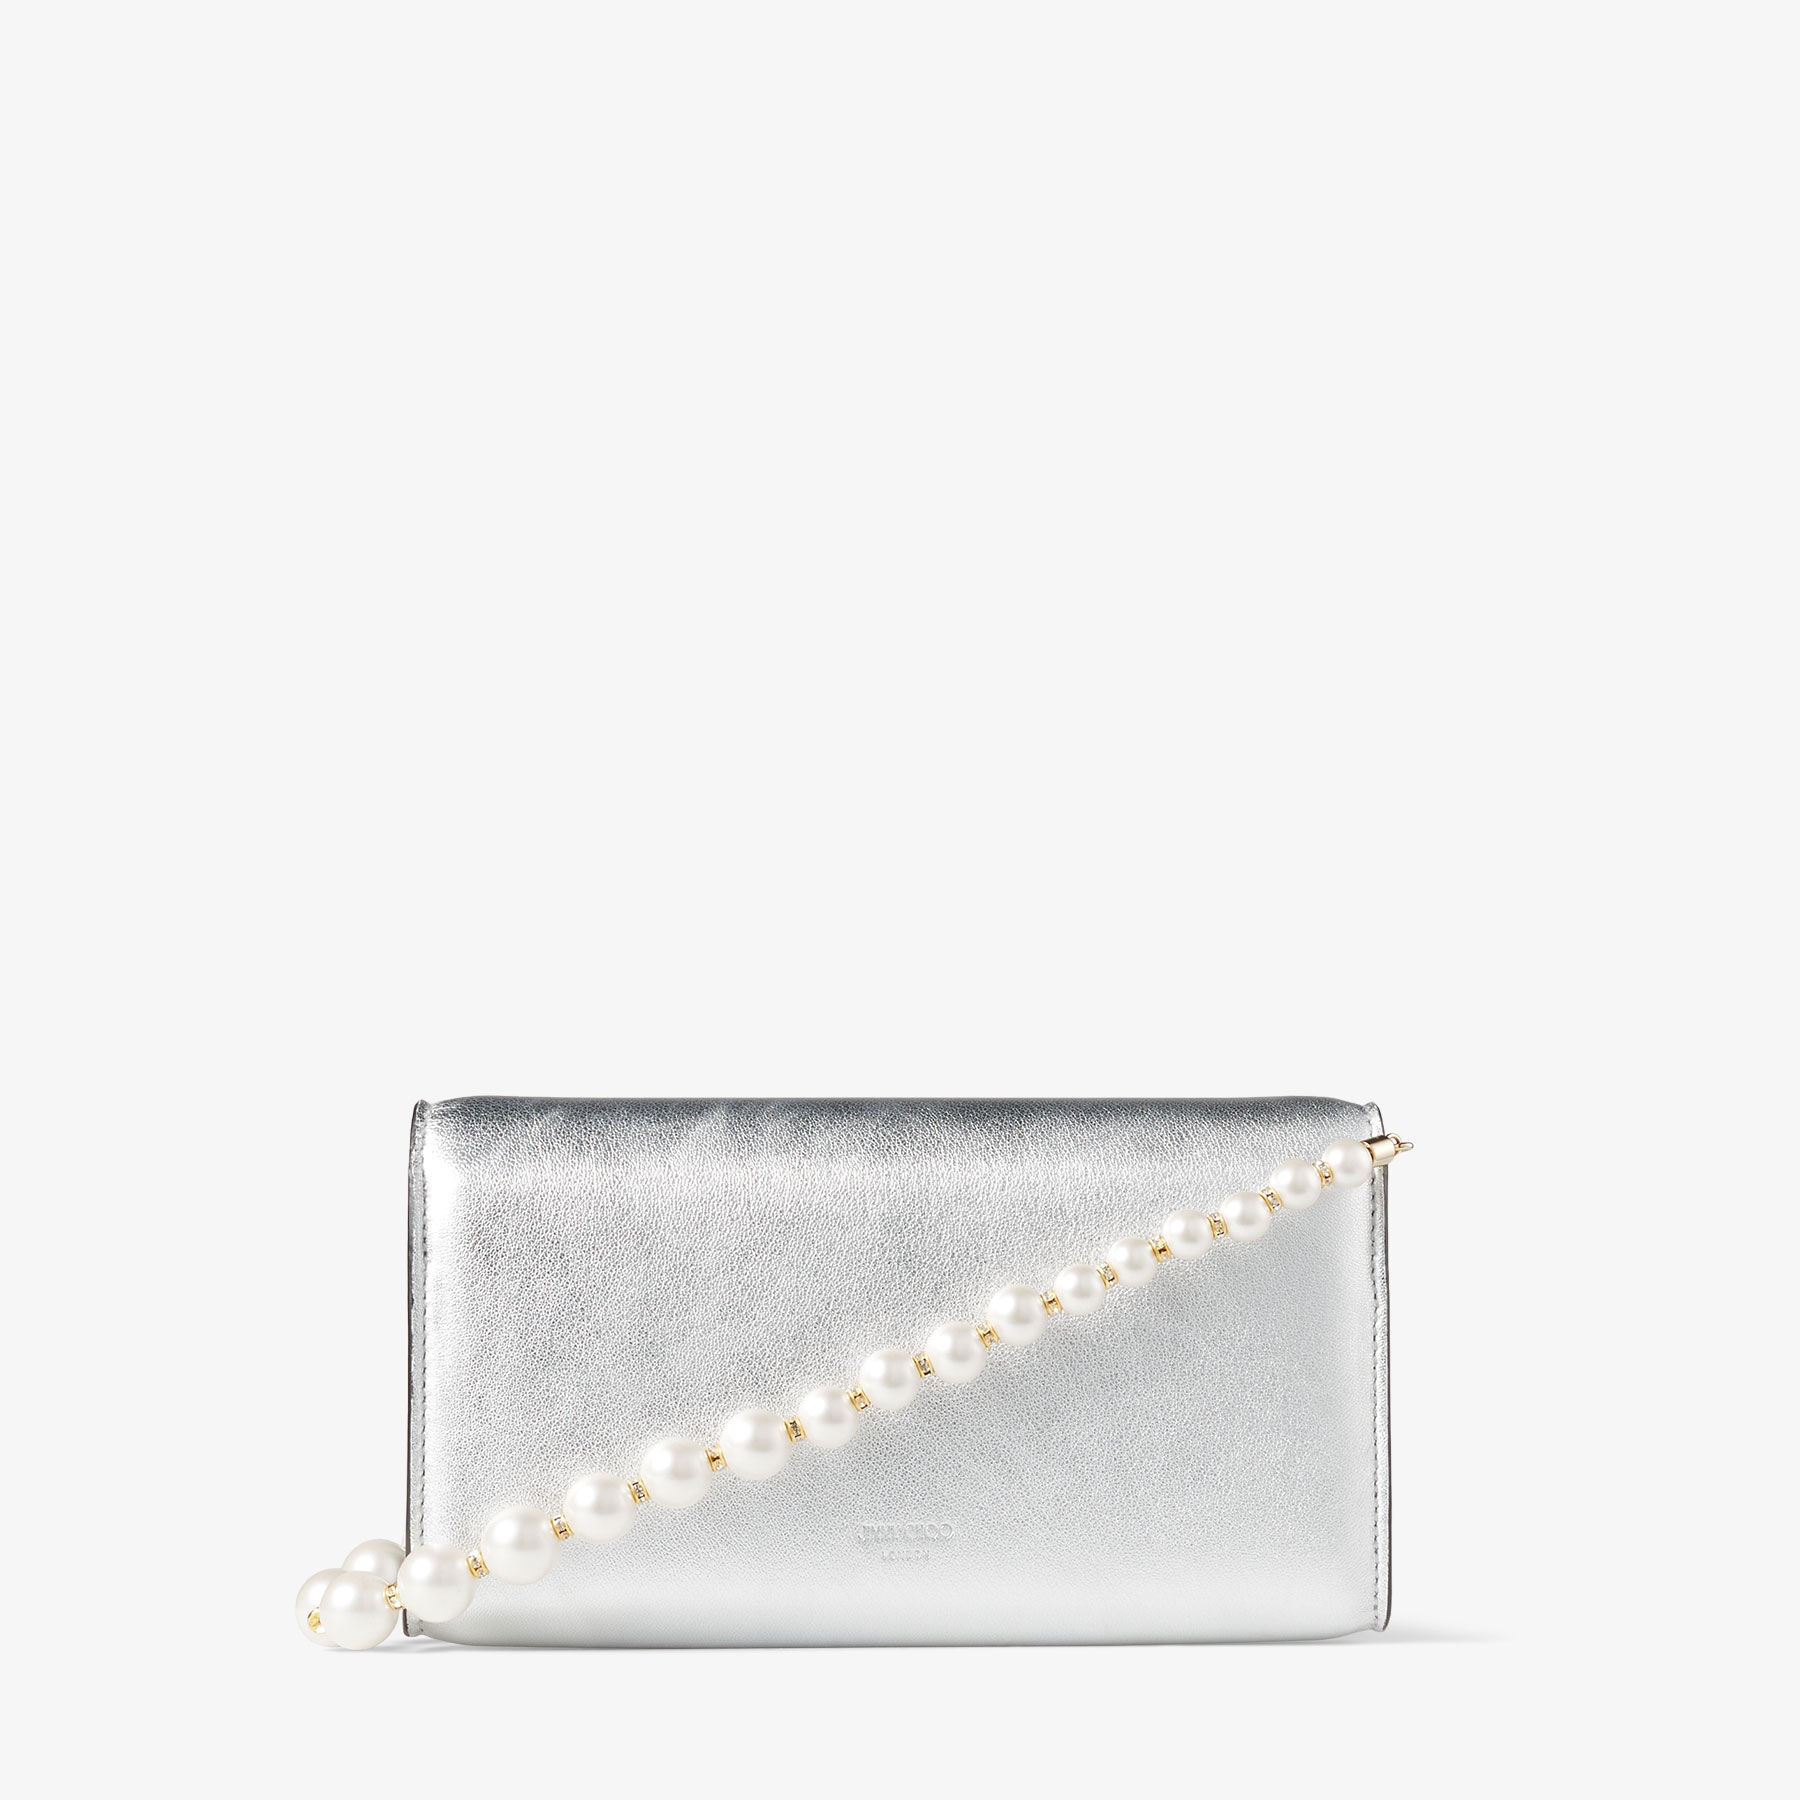 Avenue Wallet W/Chain
Silver Metallic Nappa Leather Wallet with Pearl Strap - 8